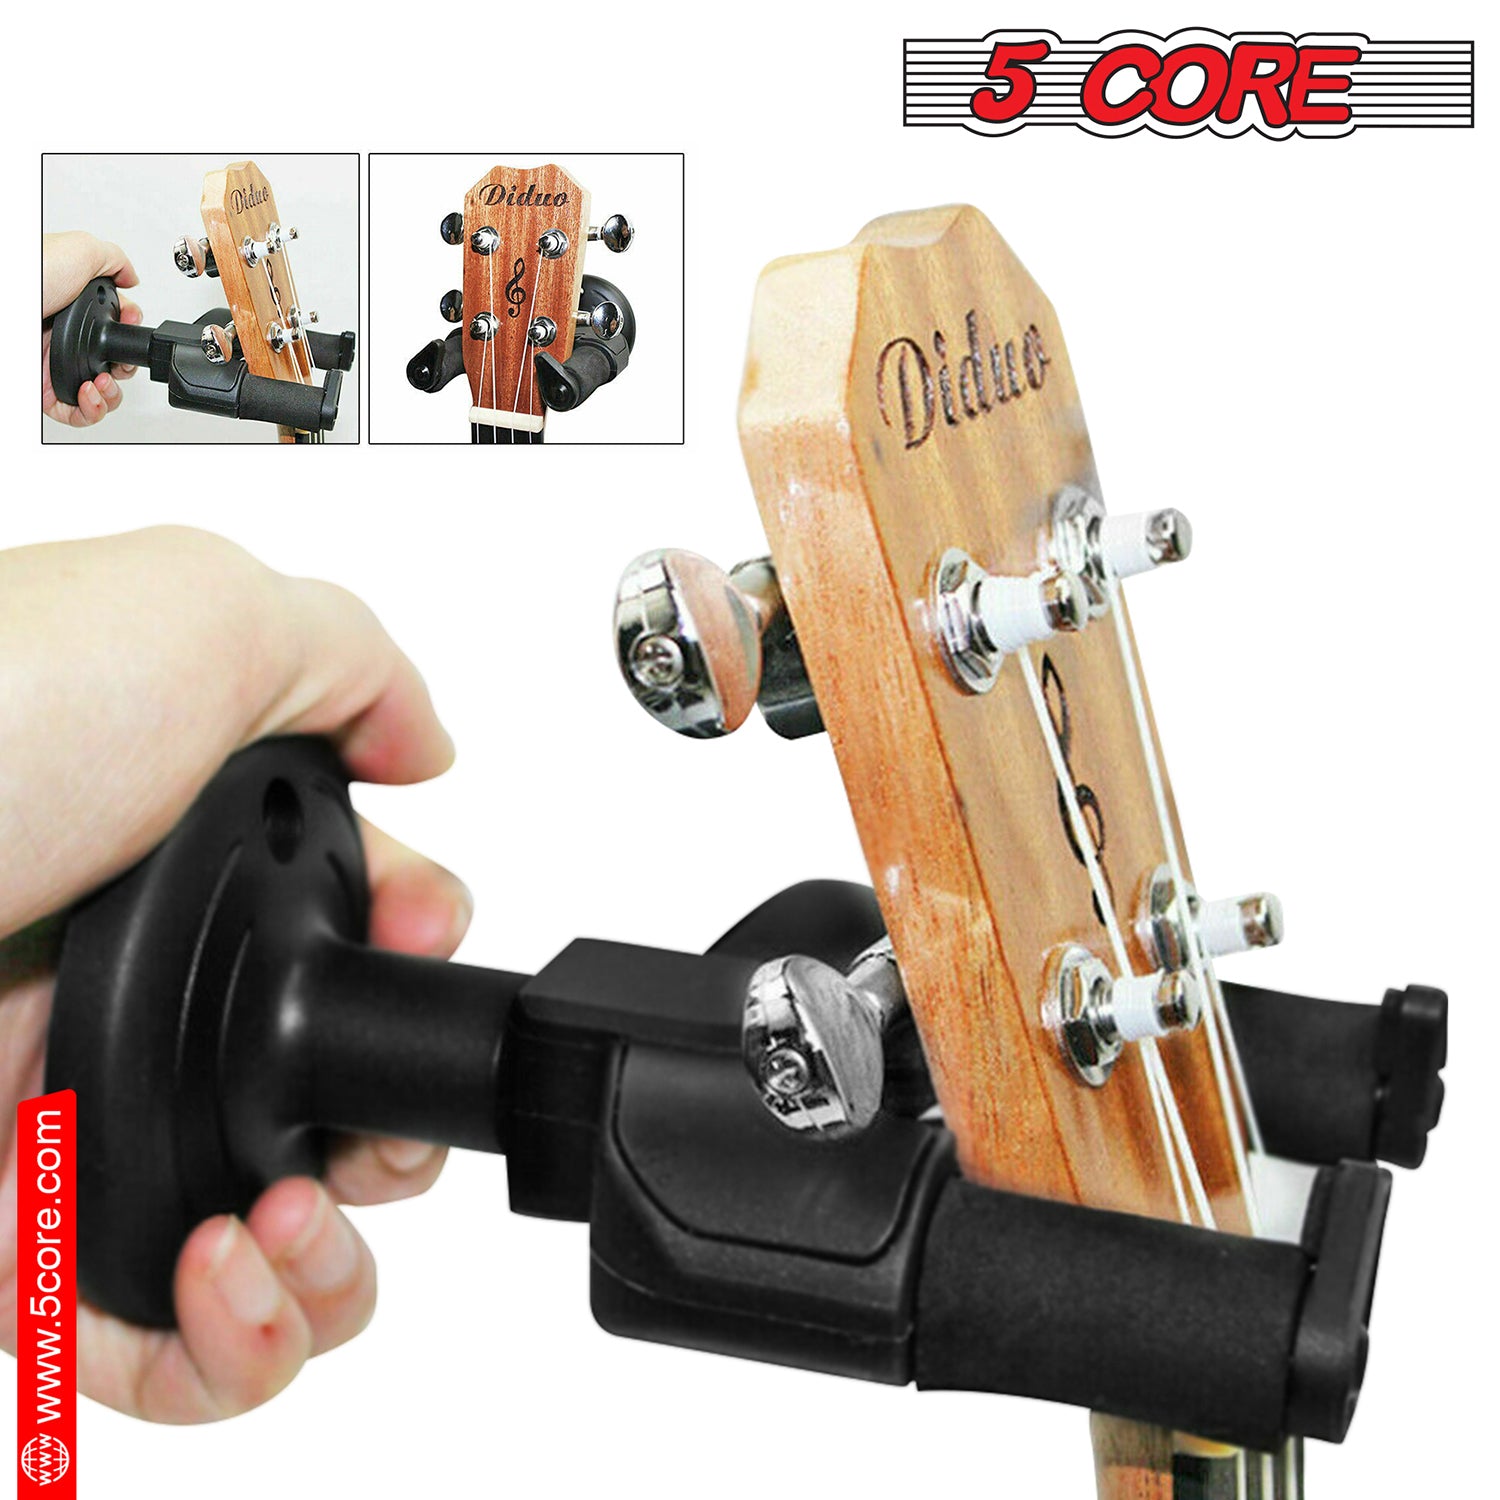 5 Core Guitar Wall Mount Hangers Adjustable Rotatable Display Wall Hook Holder w Soft Padding 1/2 Pc